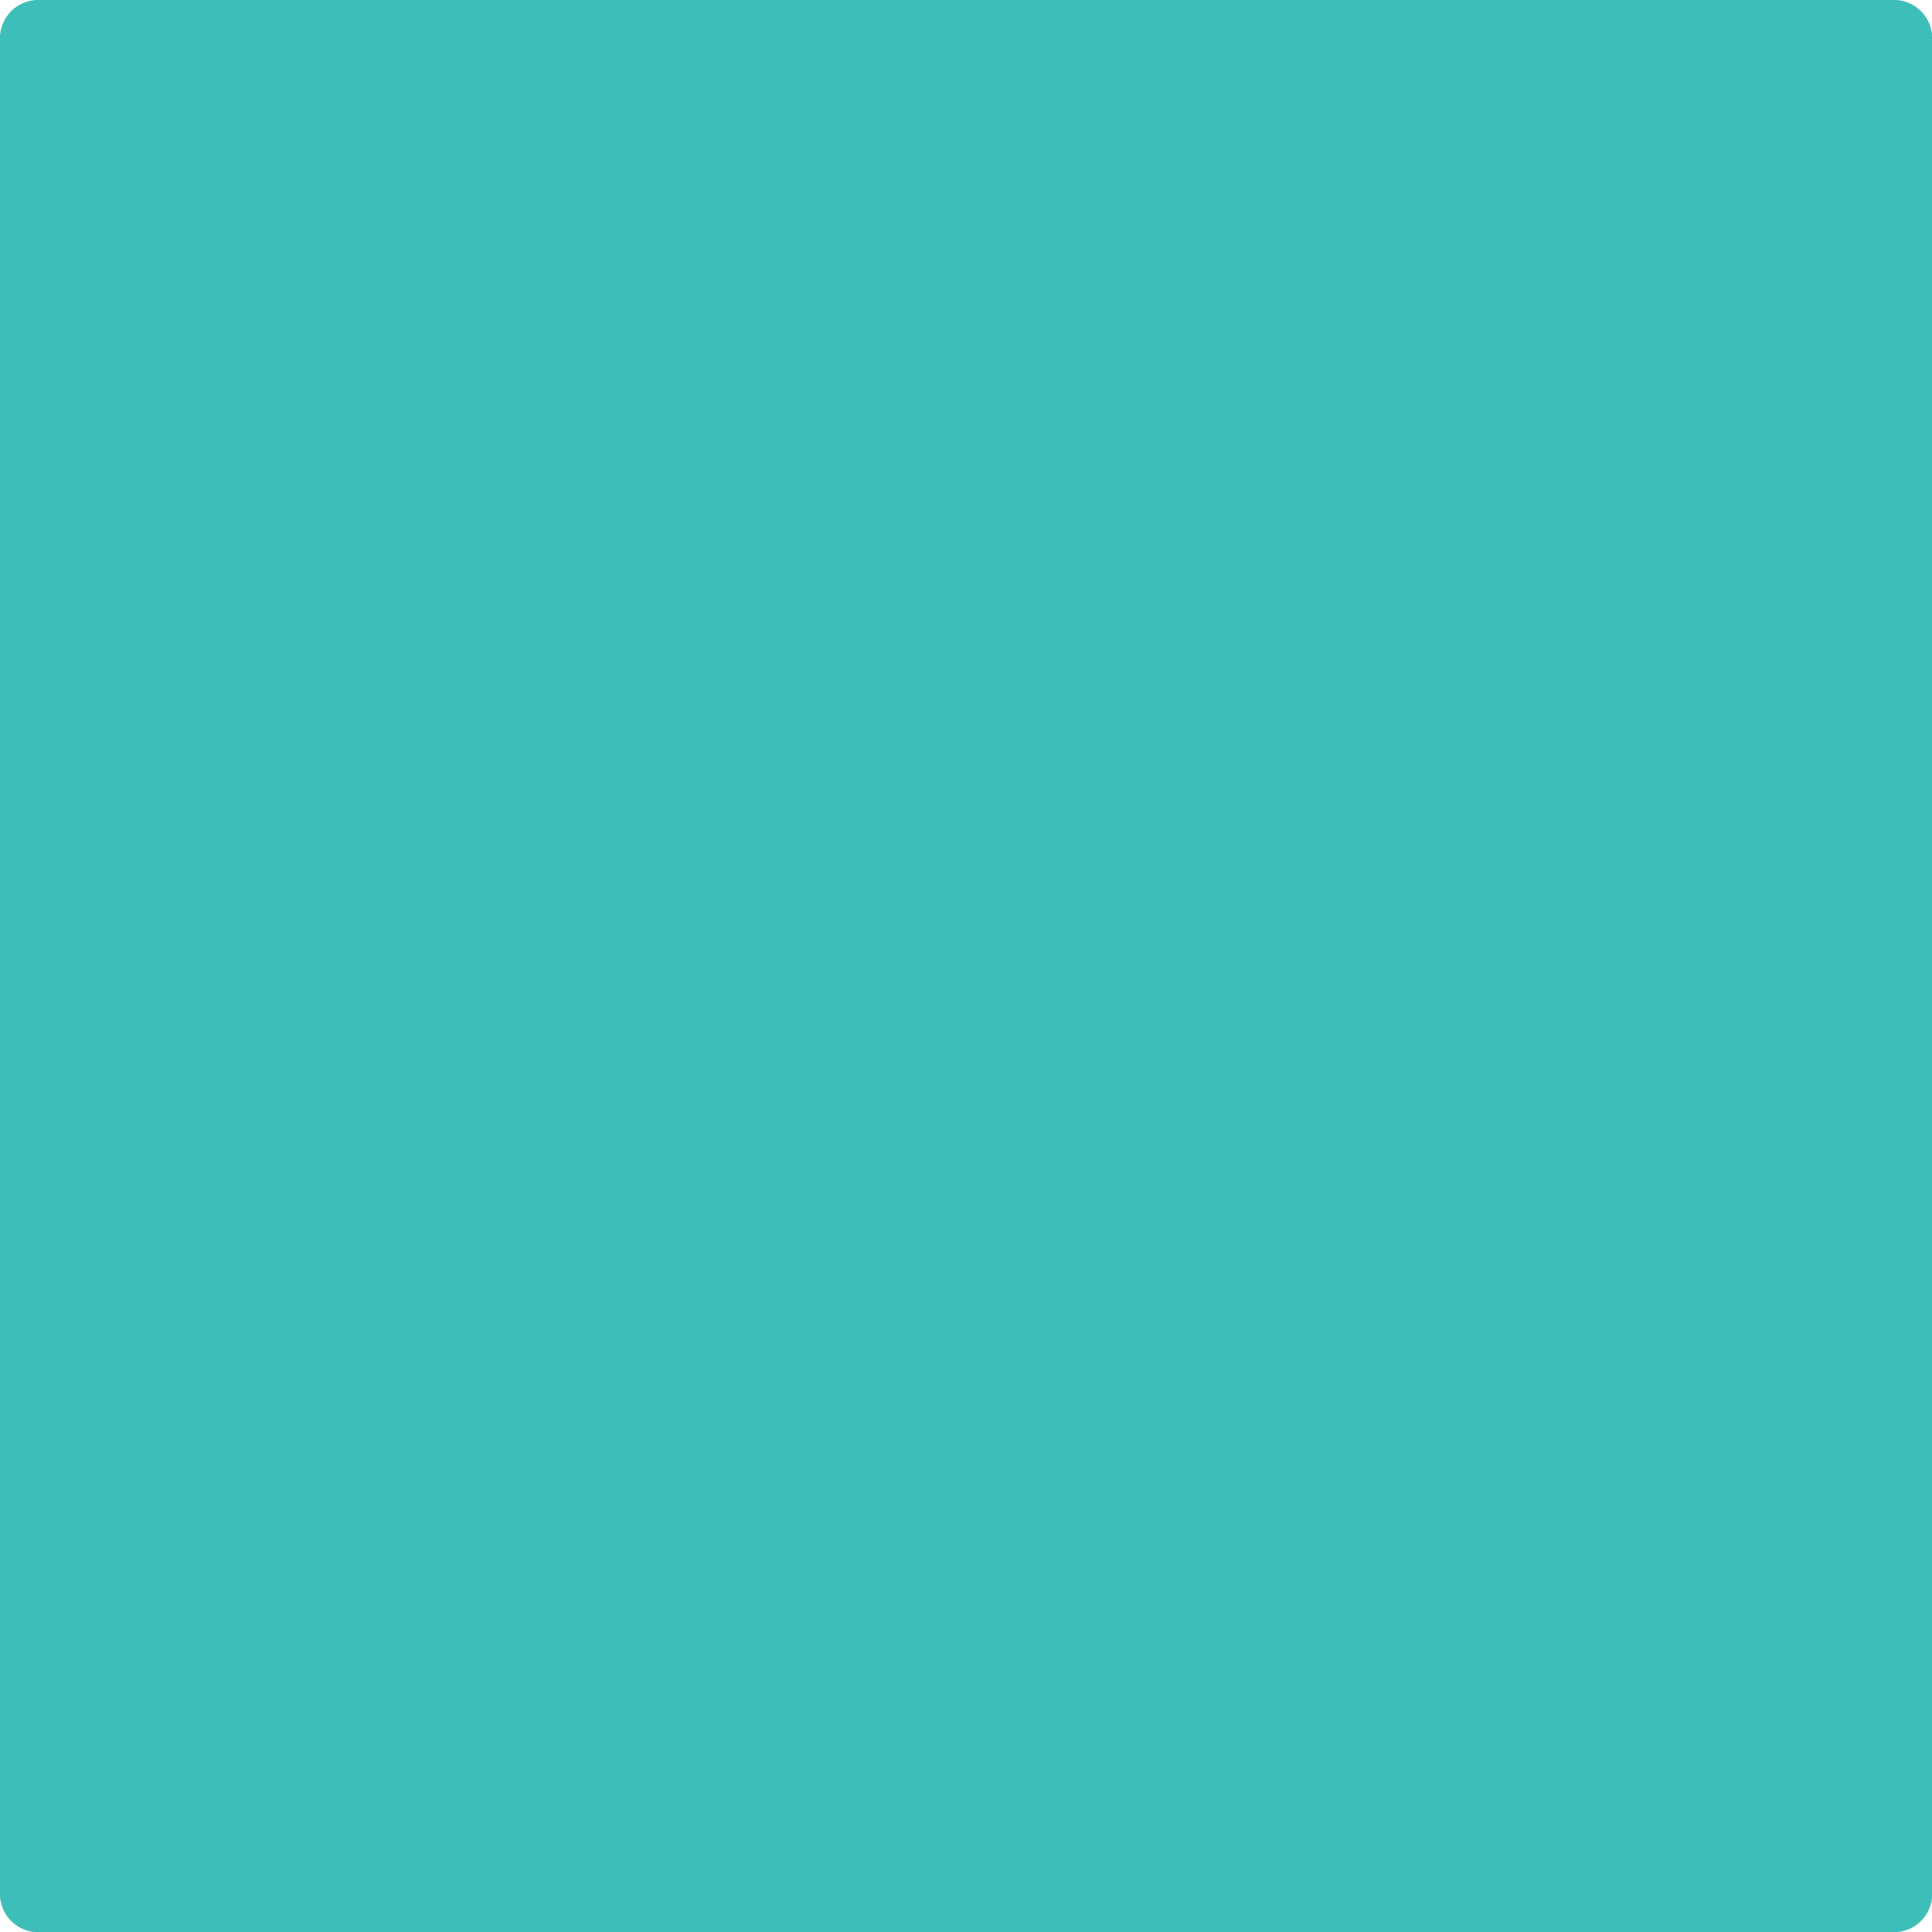 669 Oceanic Teal a Paint Color by Benjamin Moore